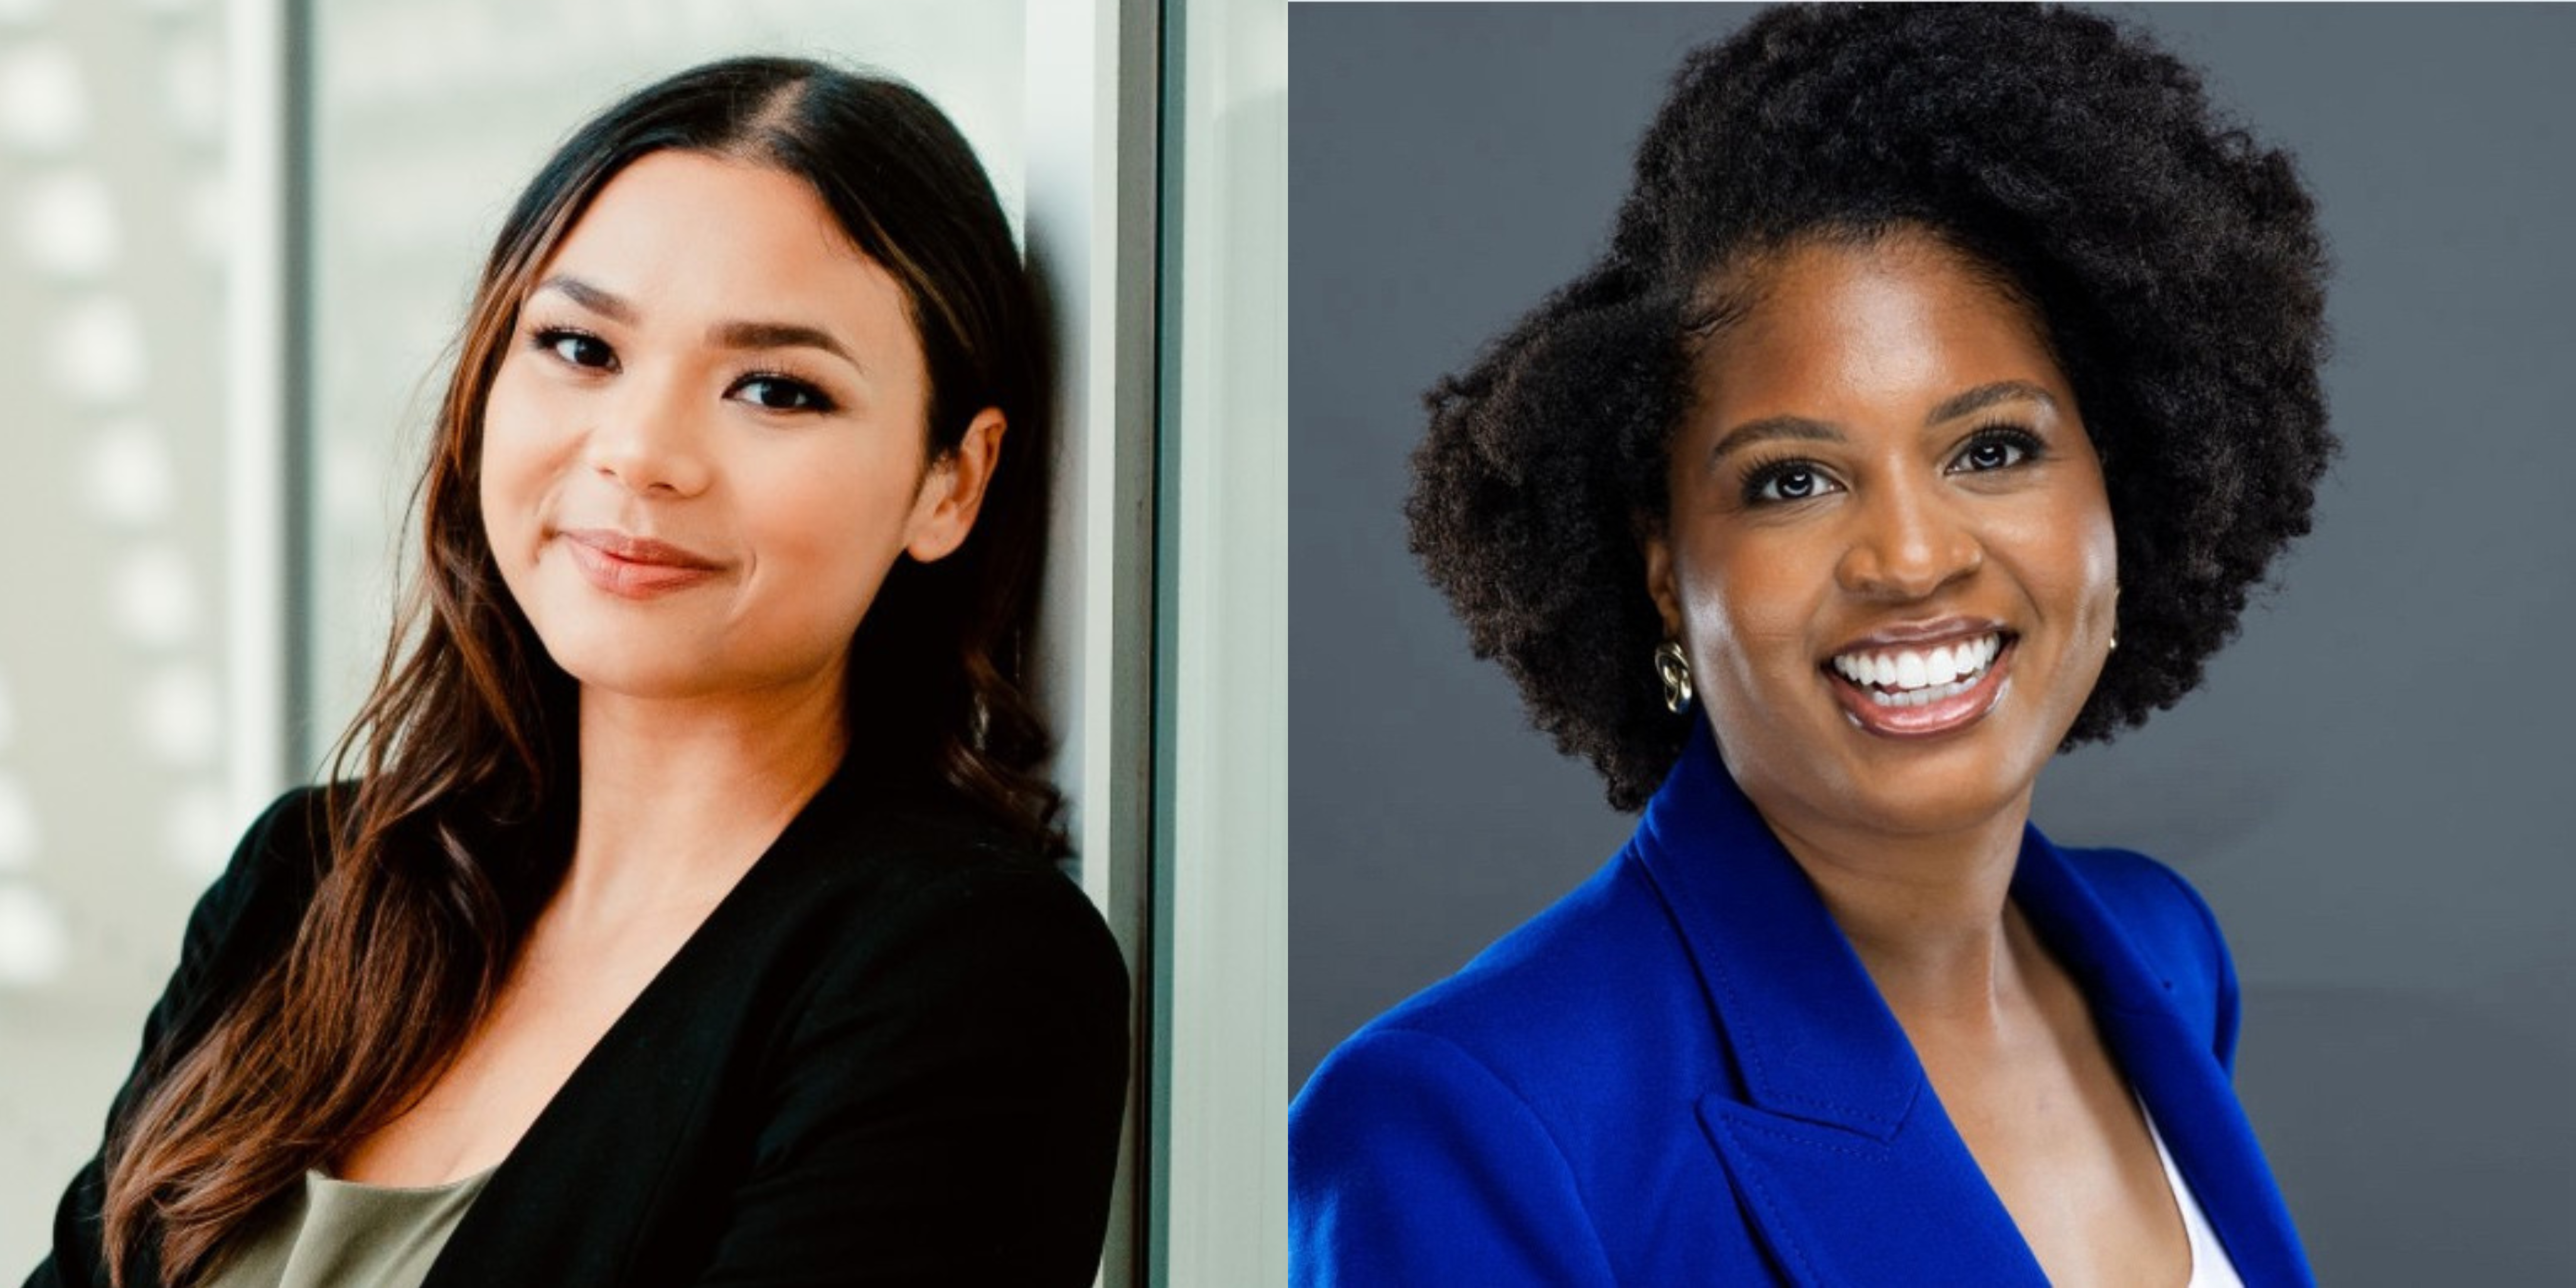 LearnLux CFP® Exam Opportunity Scholarship awarded to aspiring Certified Financial Planner™ professionals Stephanie Higgins and Jasmine Smalls